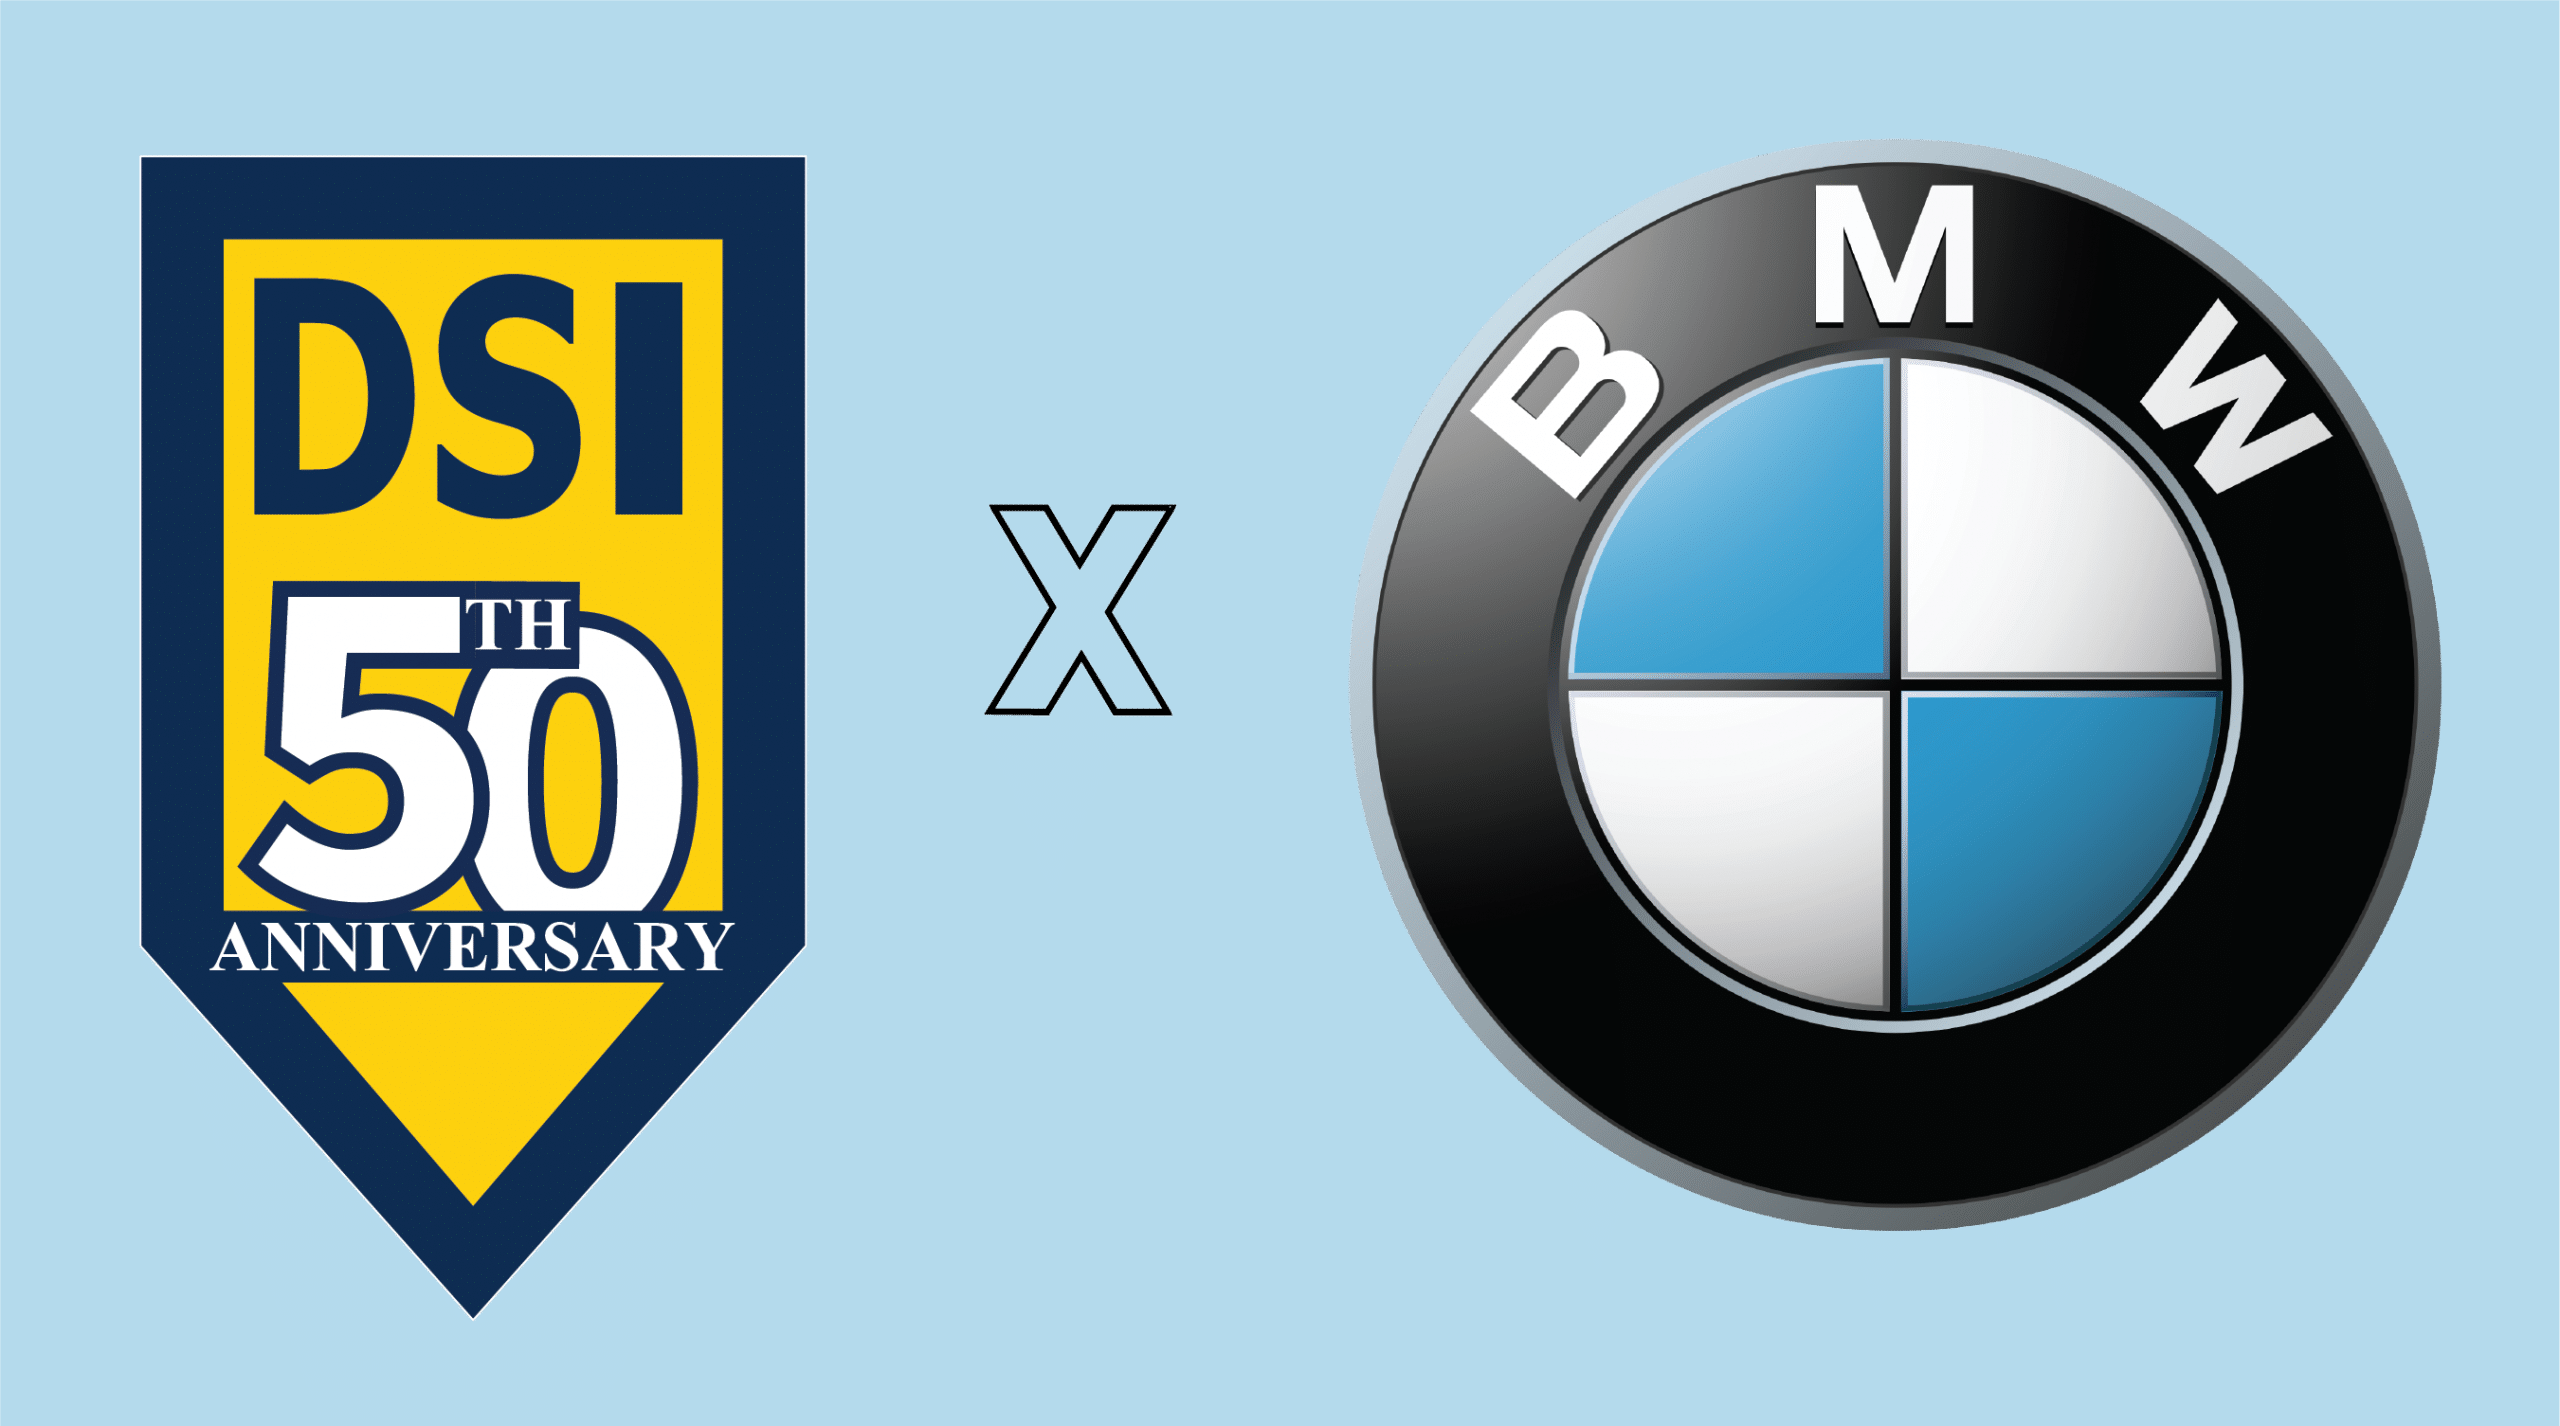 Logos of DSI and BMW together